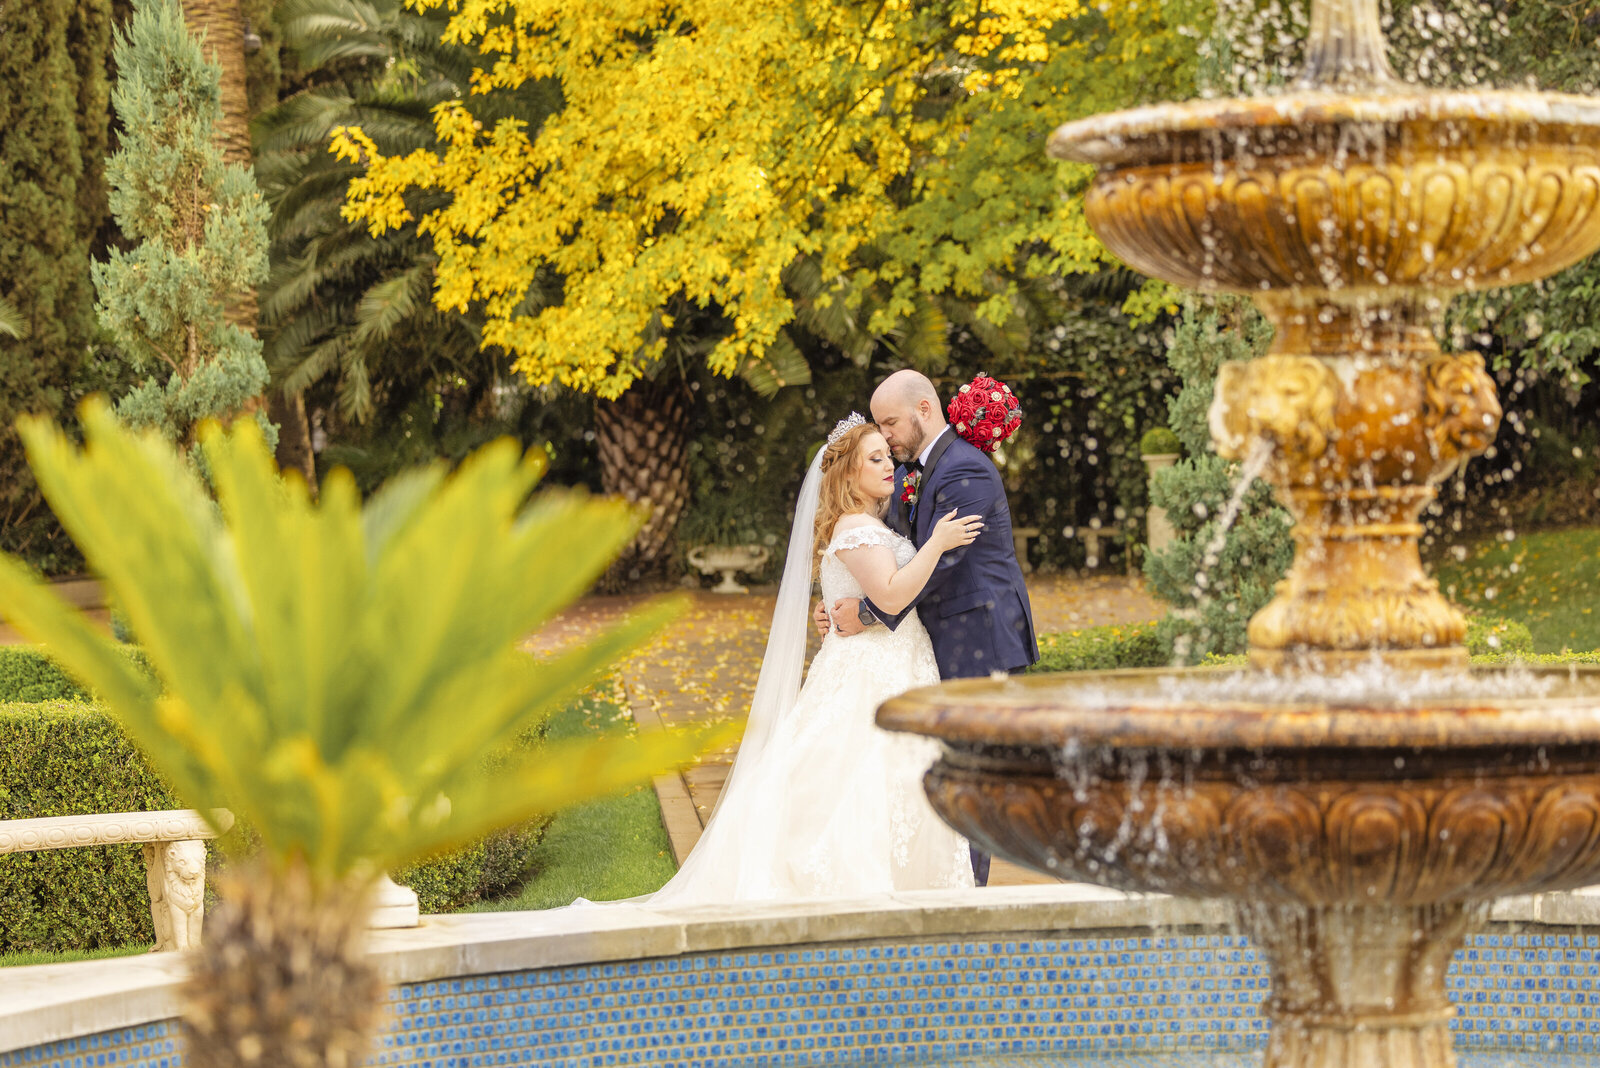 Bride and groom embrace in courtyard at wedding venue with fountain in the foreground.  Photo by Sacramento Wedding Photographer Philippe Studio Pro.